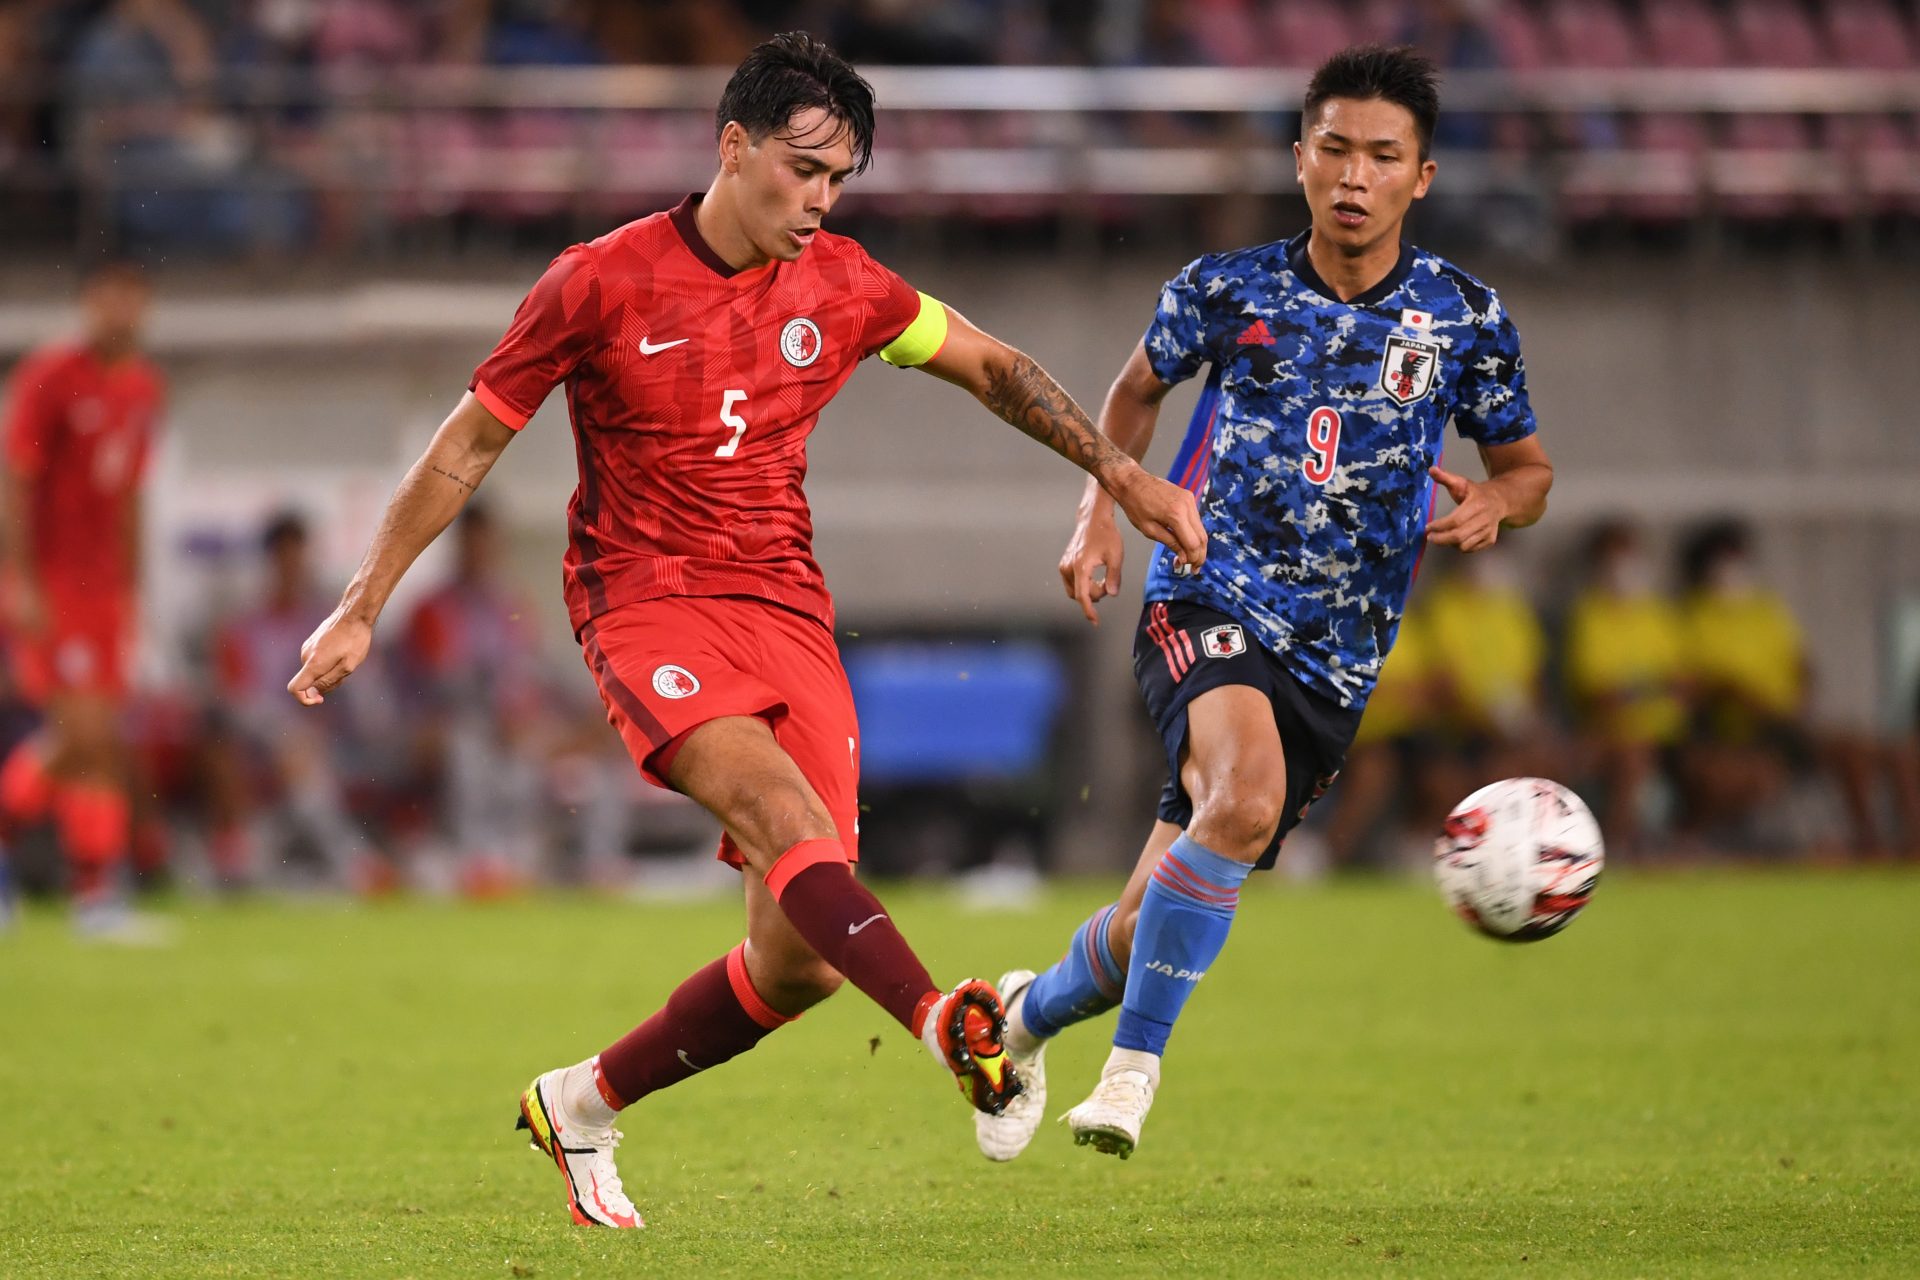 Sean Tse: From the Non-League in England to the Asian Cup with Hong Kong!